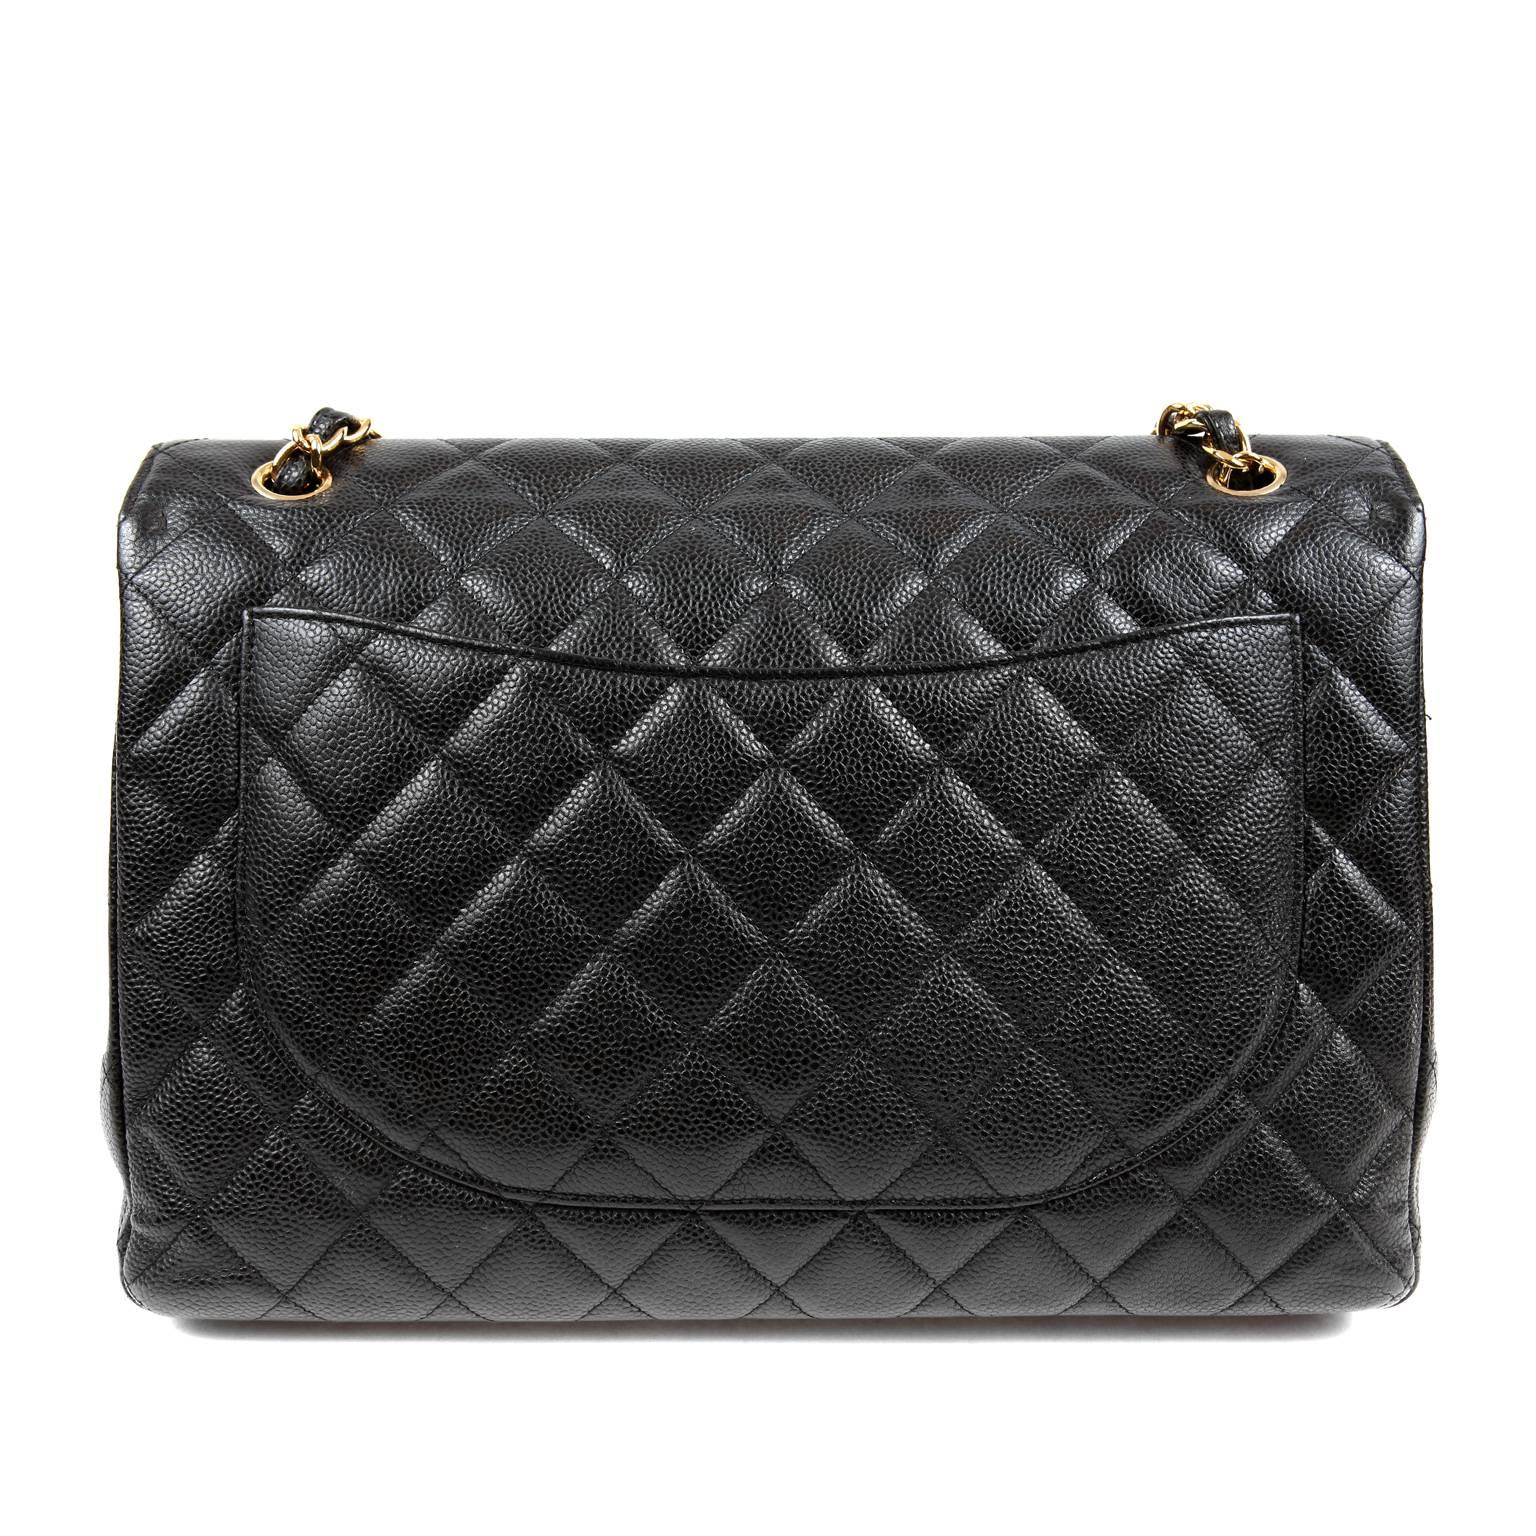 Chanel Black Caviar Classic Maxi - Near Pristine
The single flap Maxi is very difficult to find and a true prize for any collection. 

Durable and textured black caviar leather is quilted in signature Chanel diamond pattern.  Gold interlocking CC